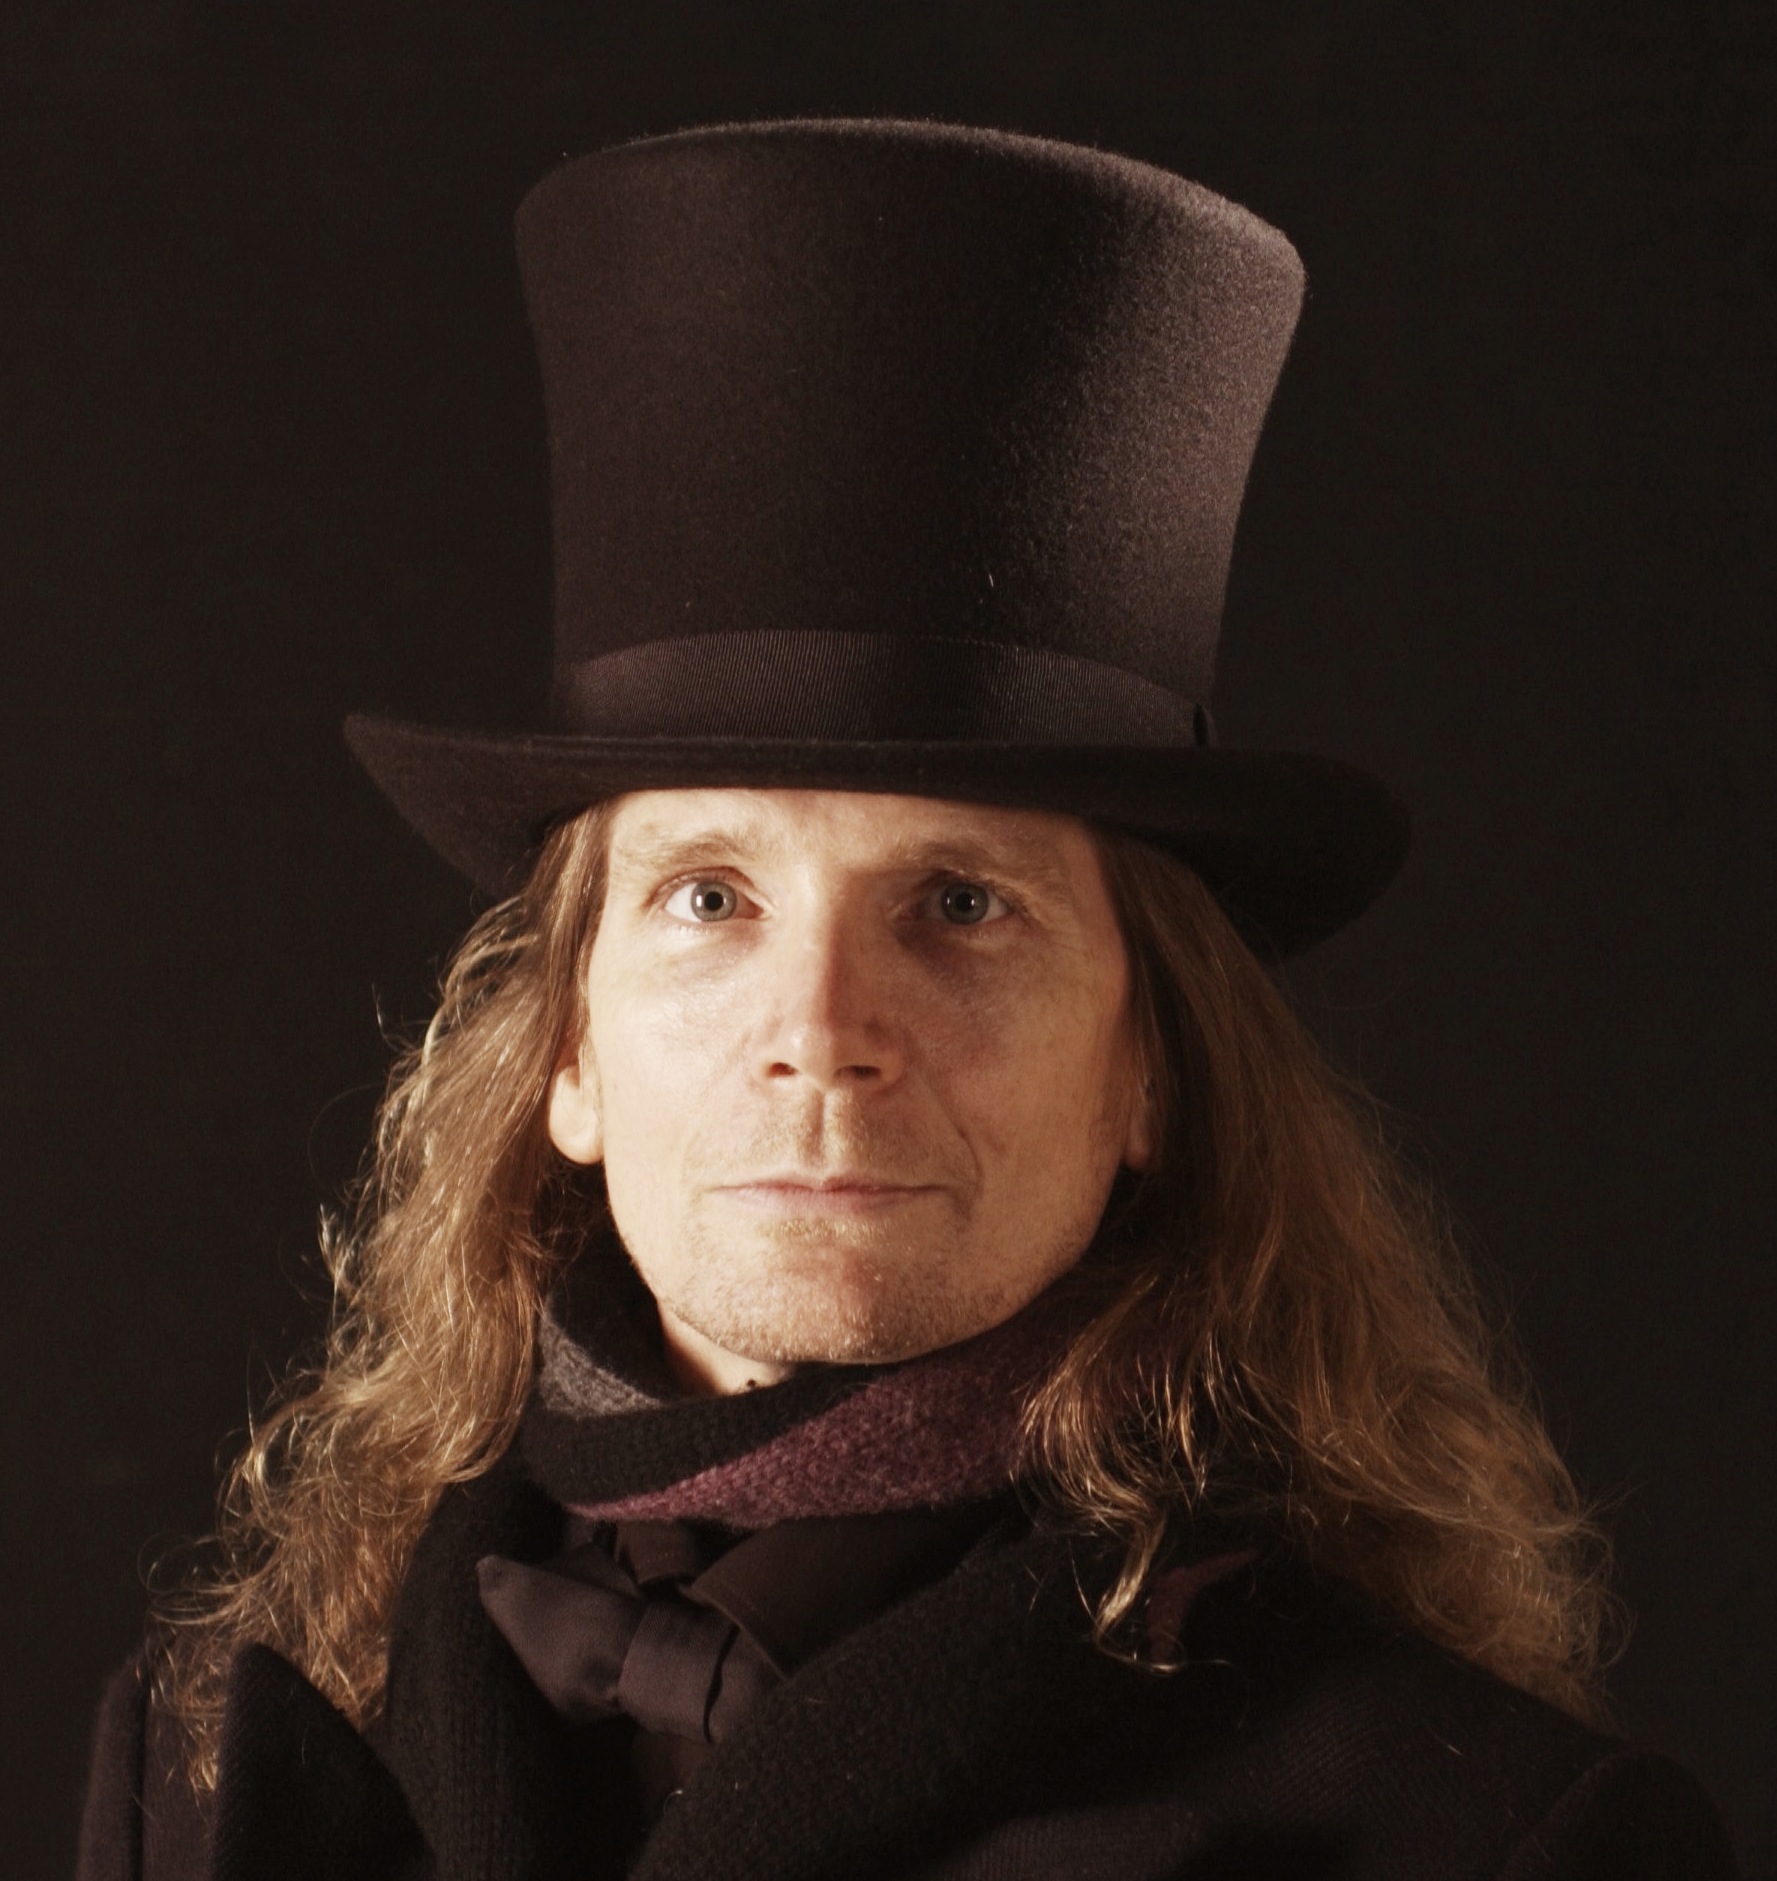 With long hair and a Top Hat in Edinburgh